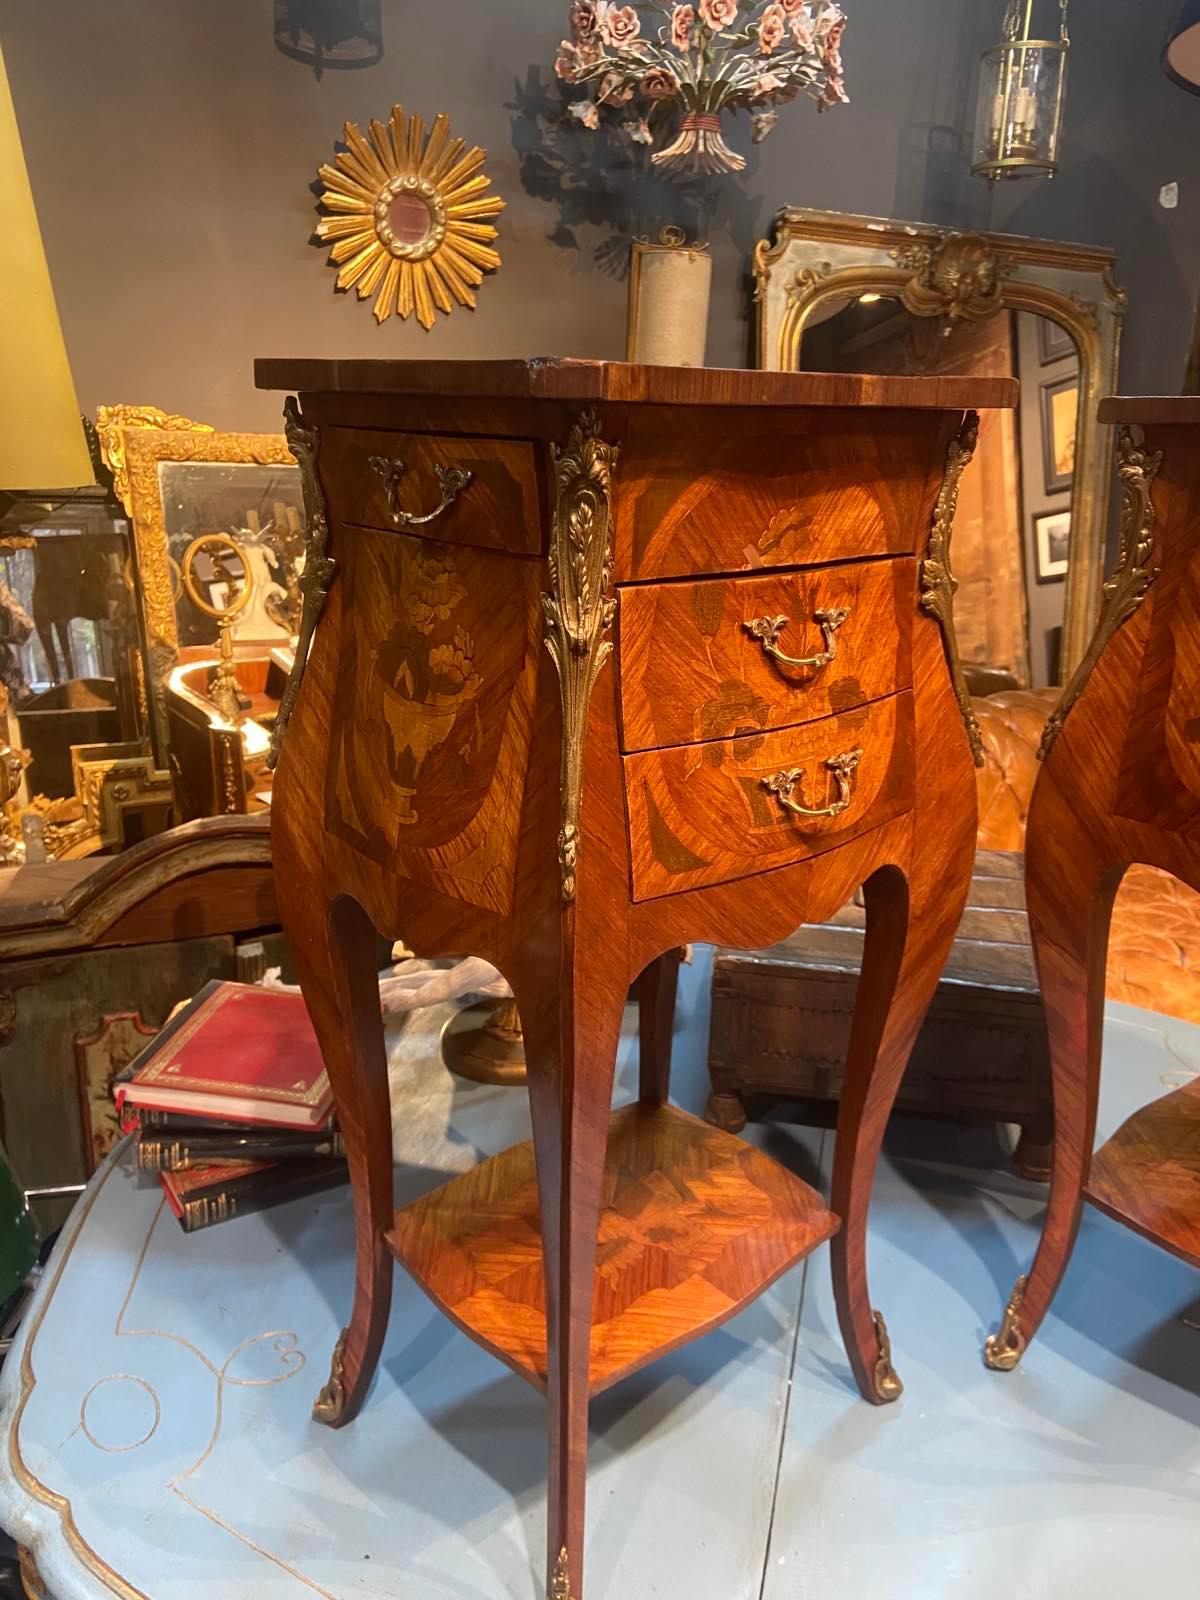 Hand-Carved 19th Century French Mahogany Inlaid Side Table with Drawers in Louis XVI Style